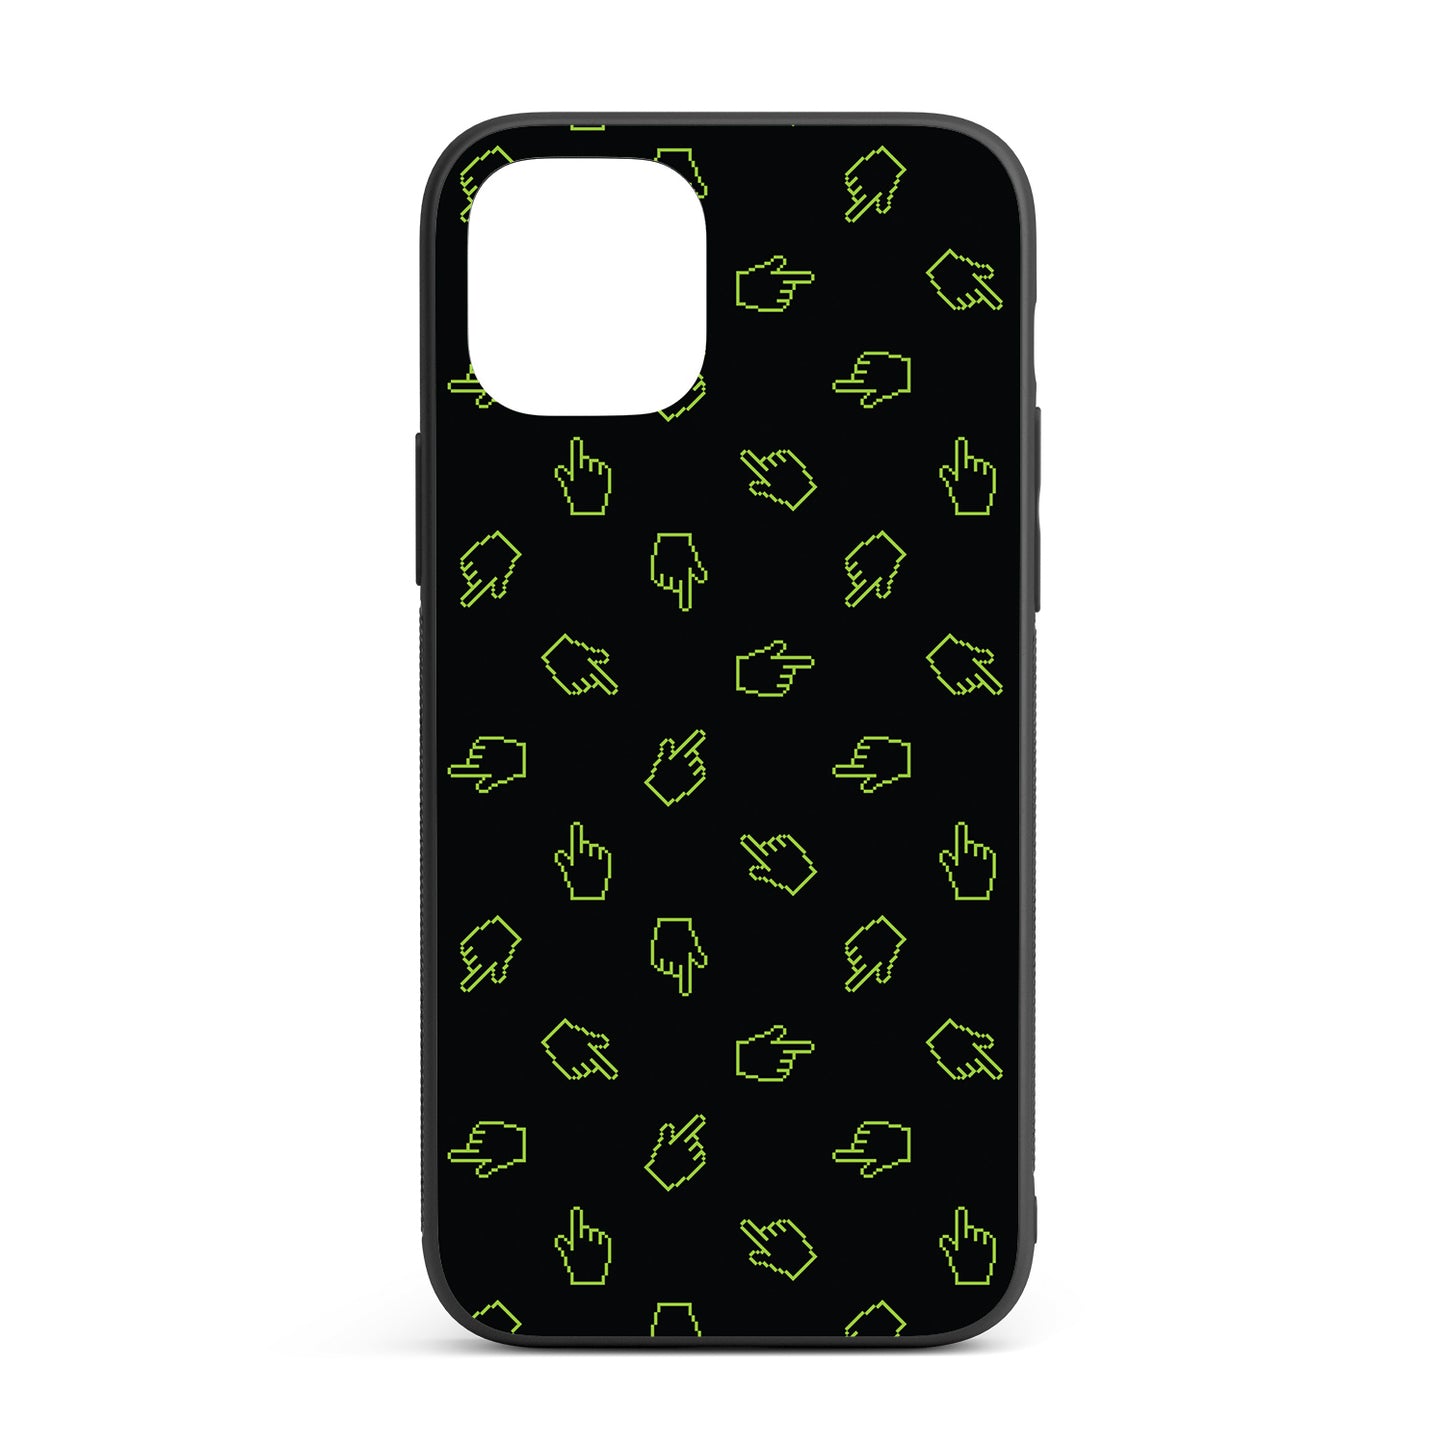 Pixelated Hand Cursor iPhone glass case